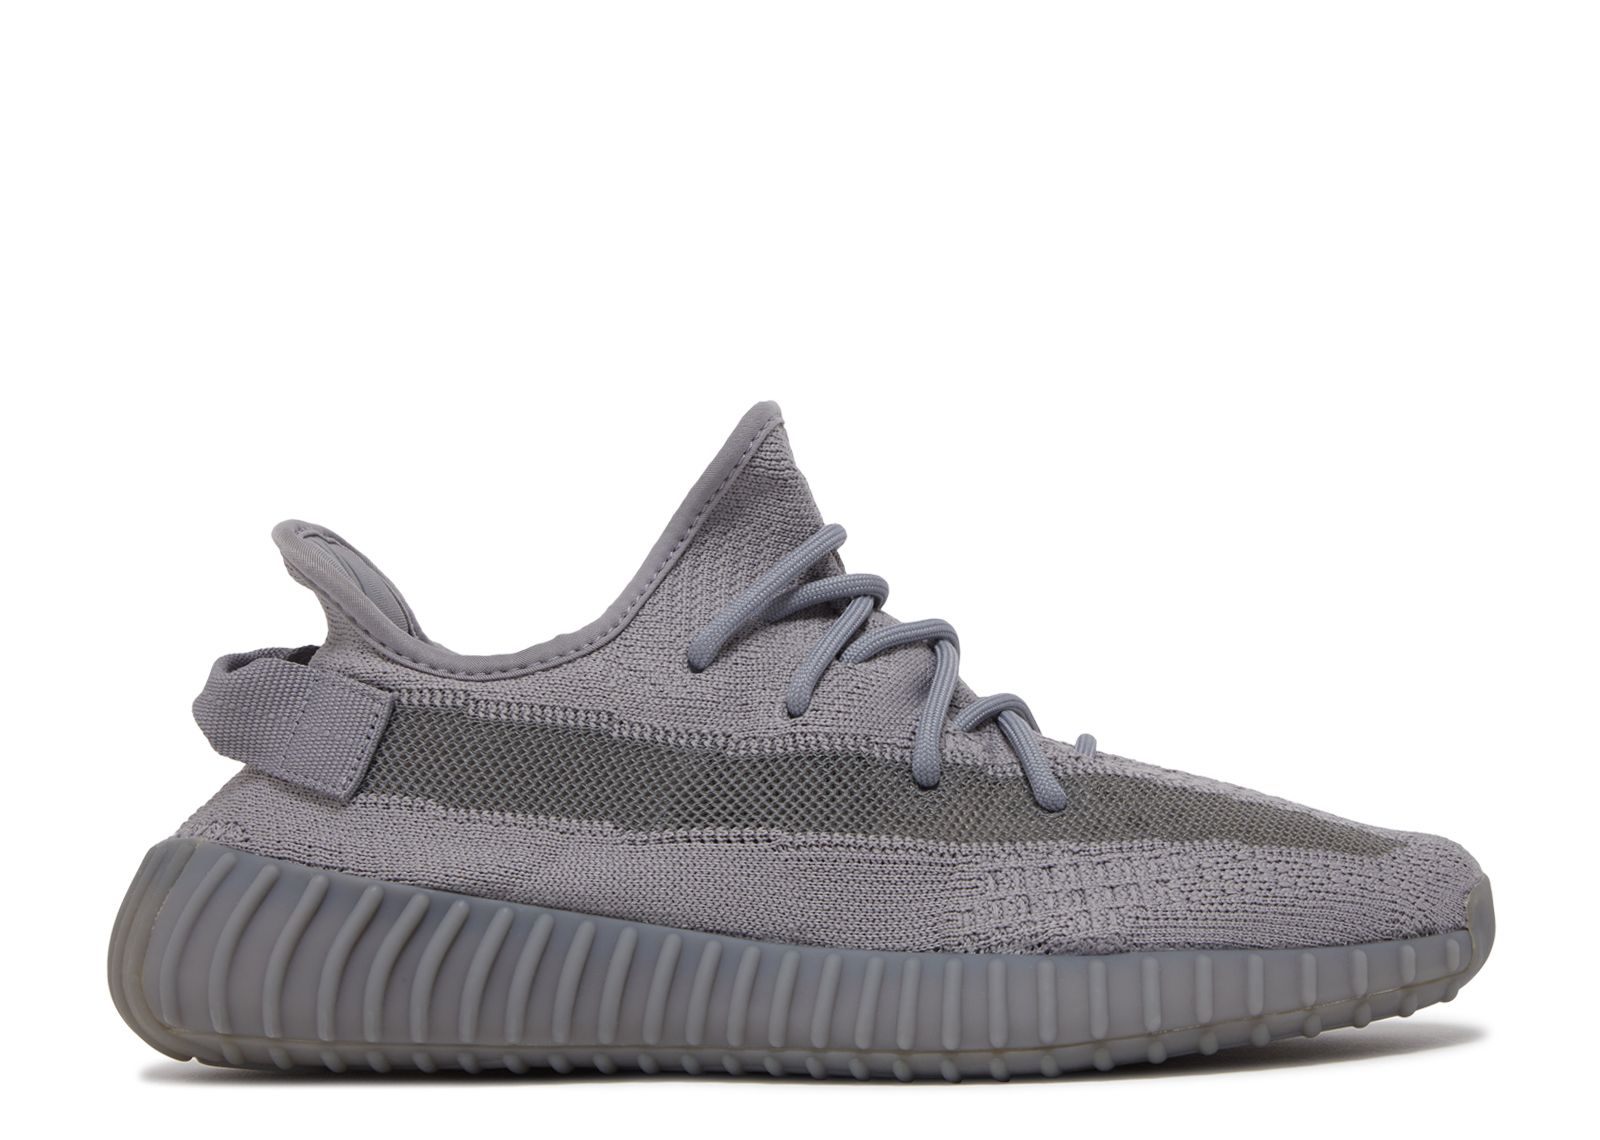 Buy The adidas Yeezy Boost 350 V2 Black Non Reflective Right Here •